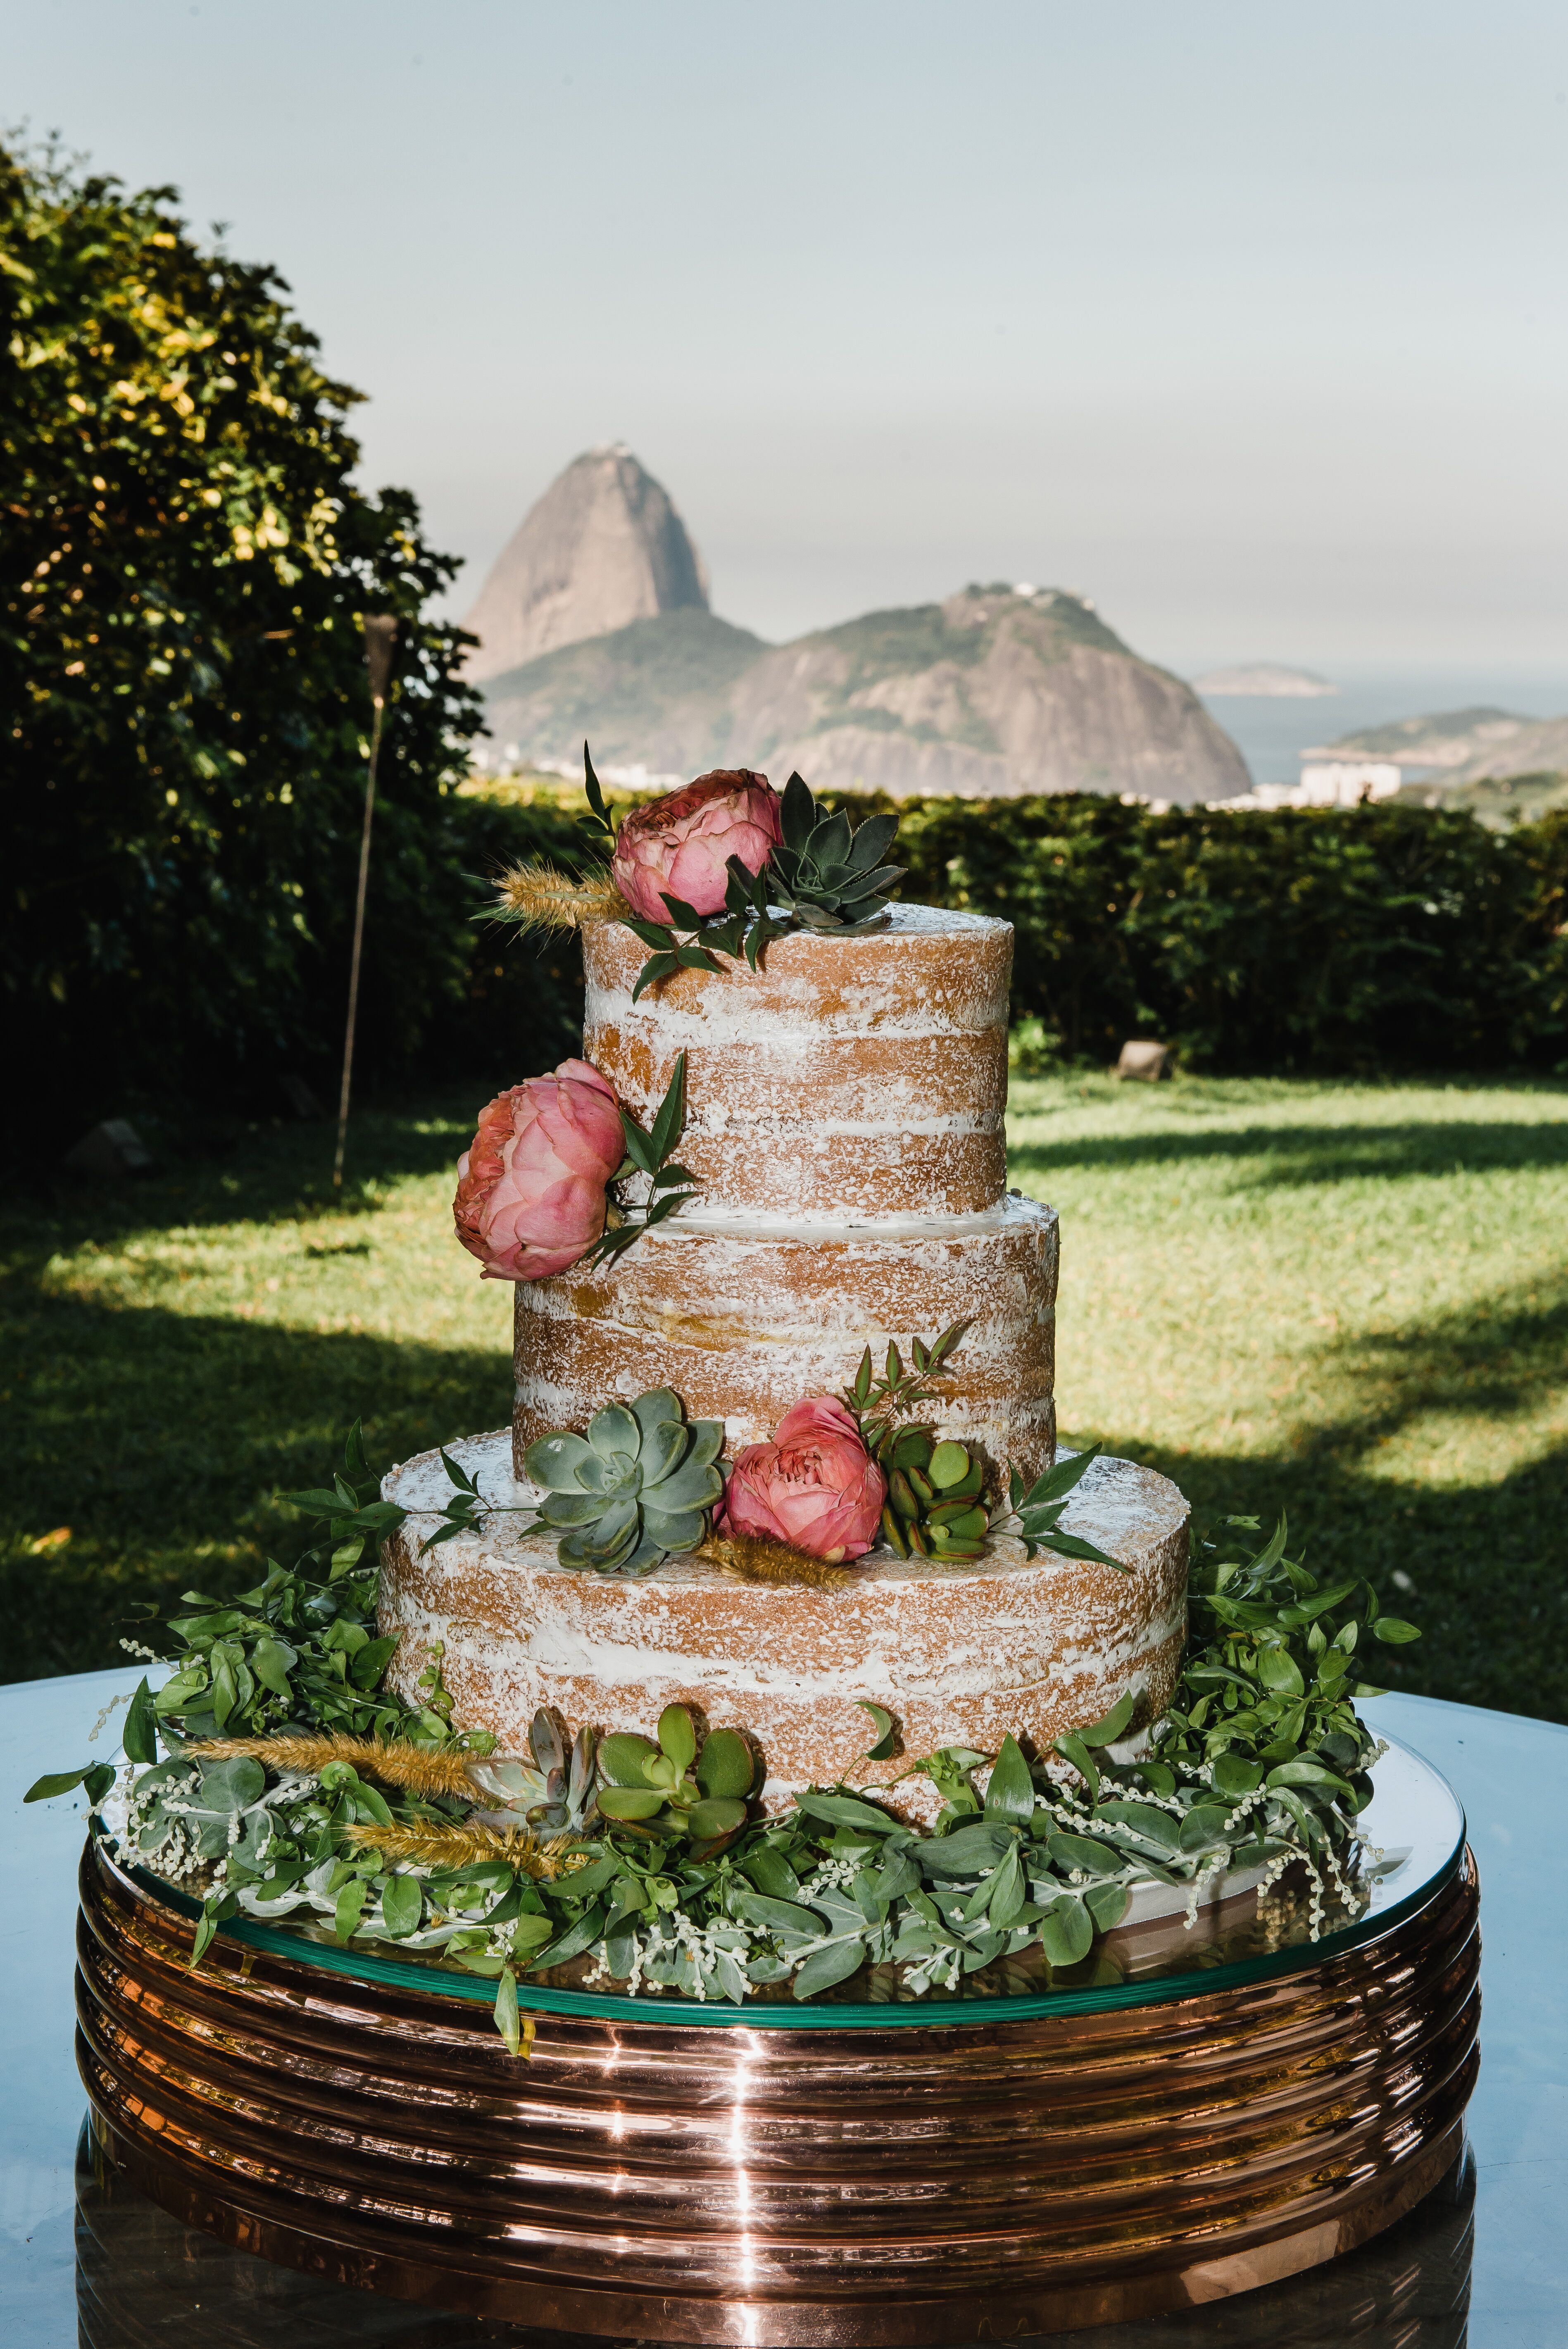 Rustic Wedding Cake With Succulents - CakeCentral.com